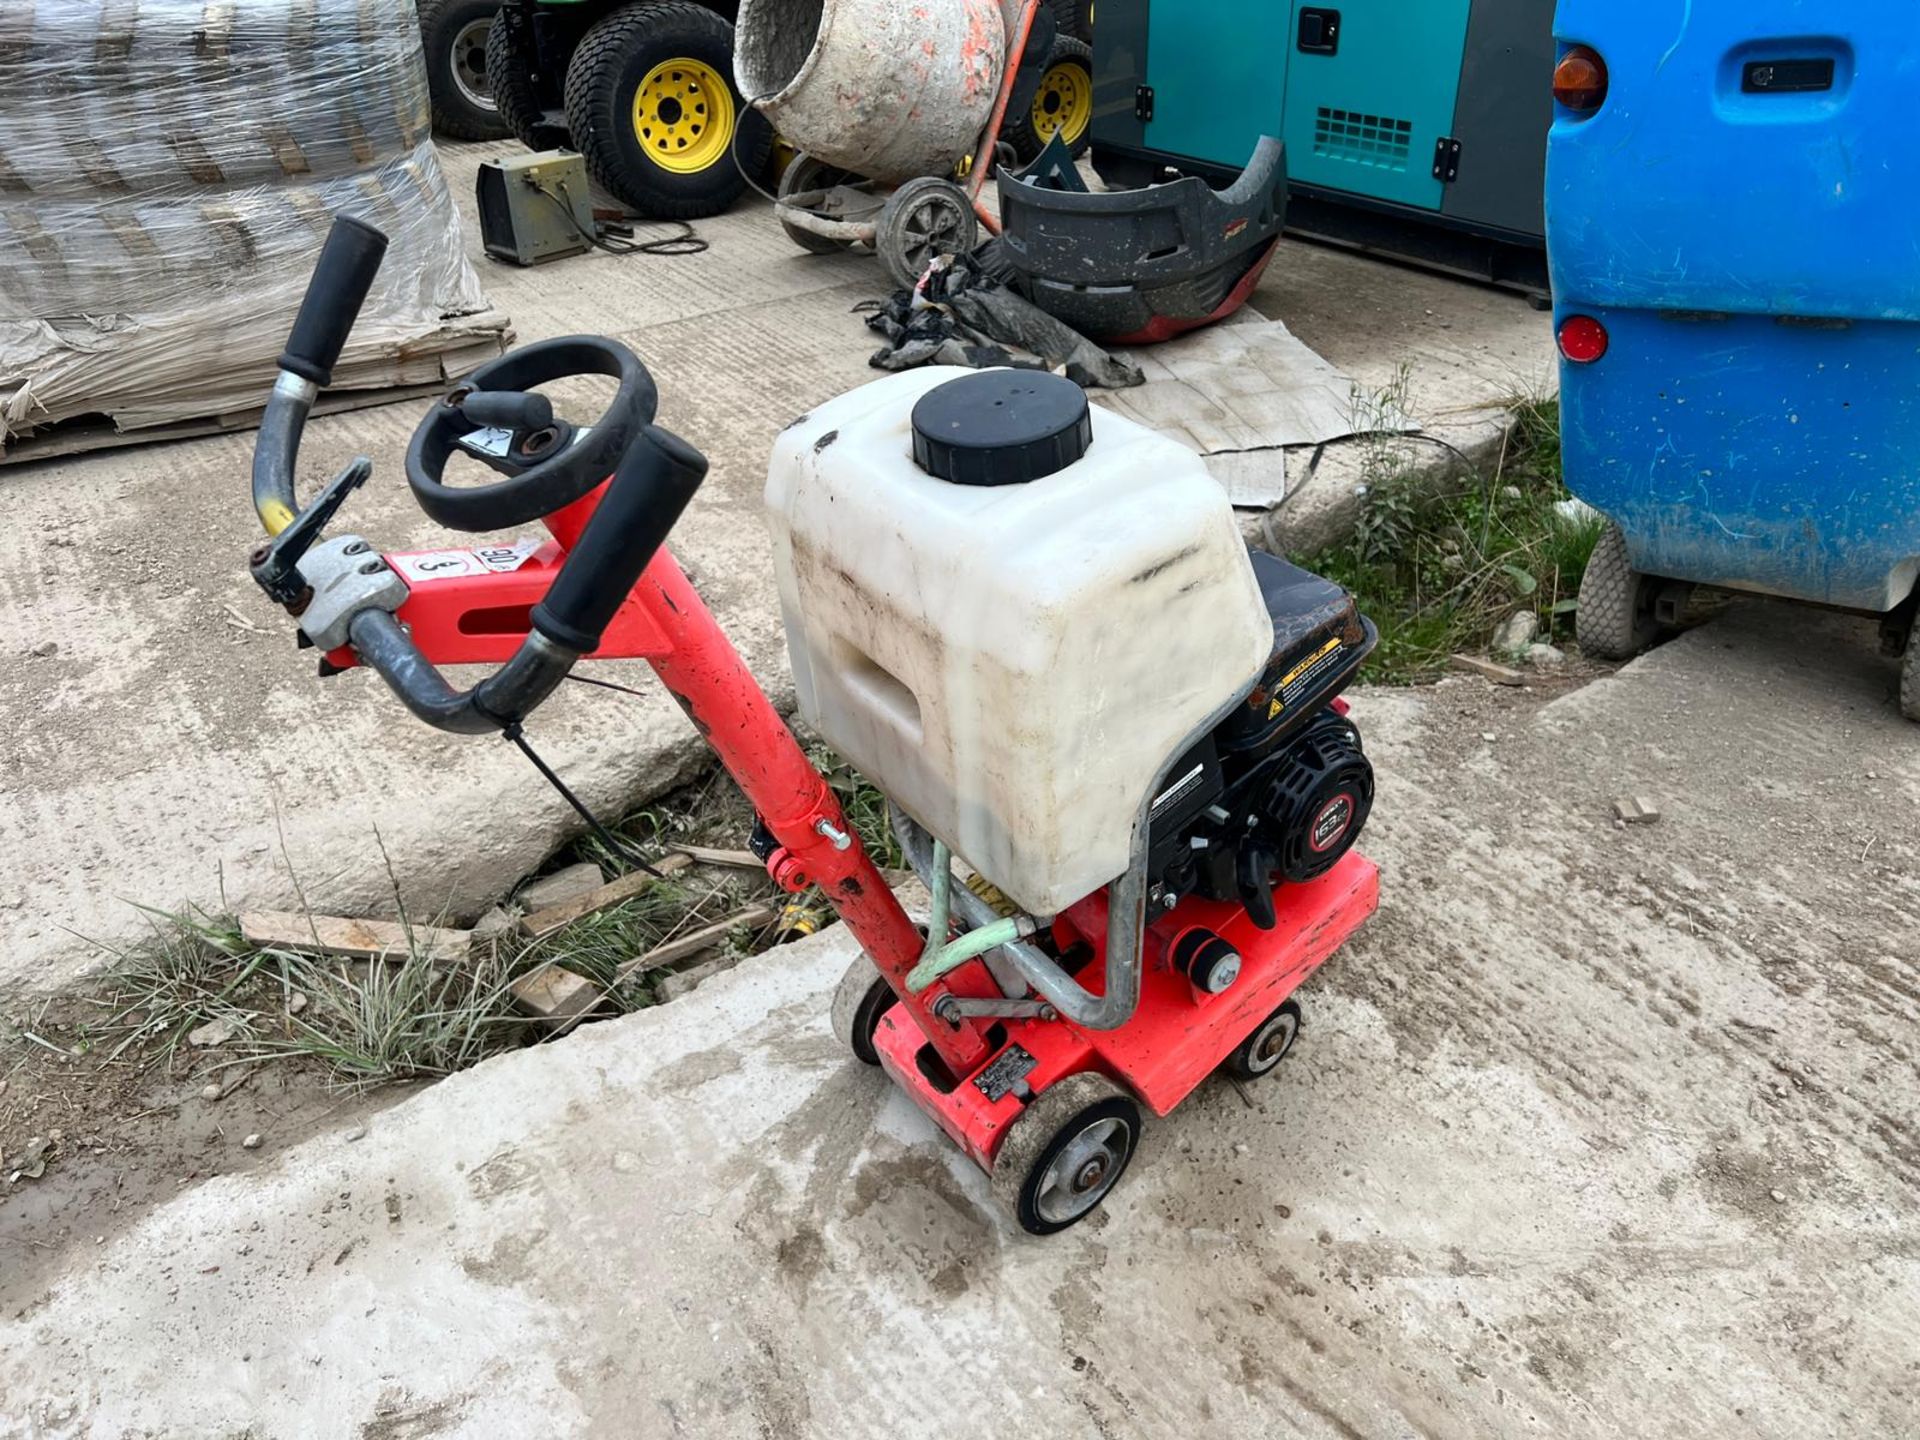 2014 Husqvarna FS305 350mm Petrol Floor Saw With Blade, Runs And Works, Water Tank *PLUS VAT* - Image 4 of 10